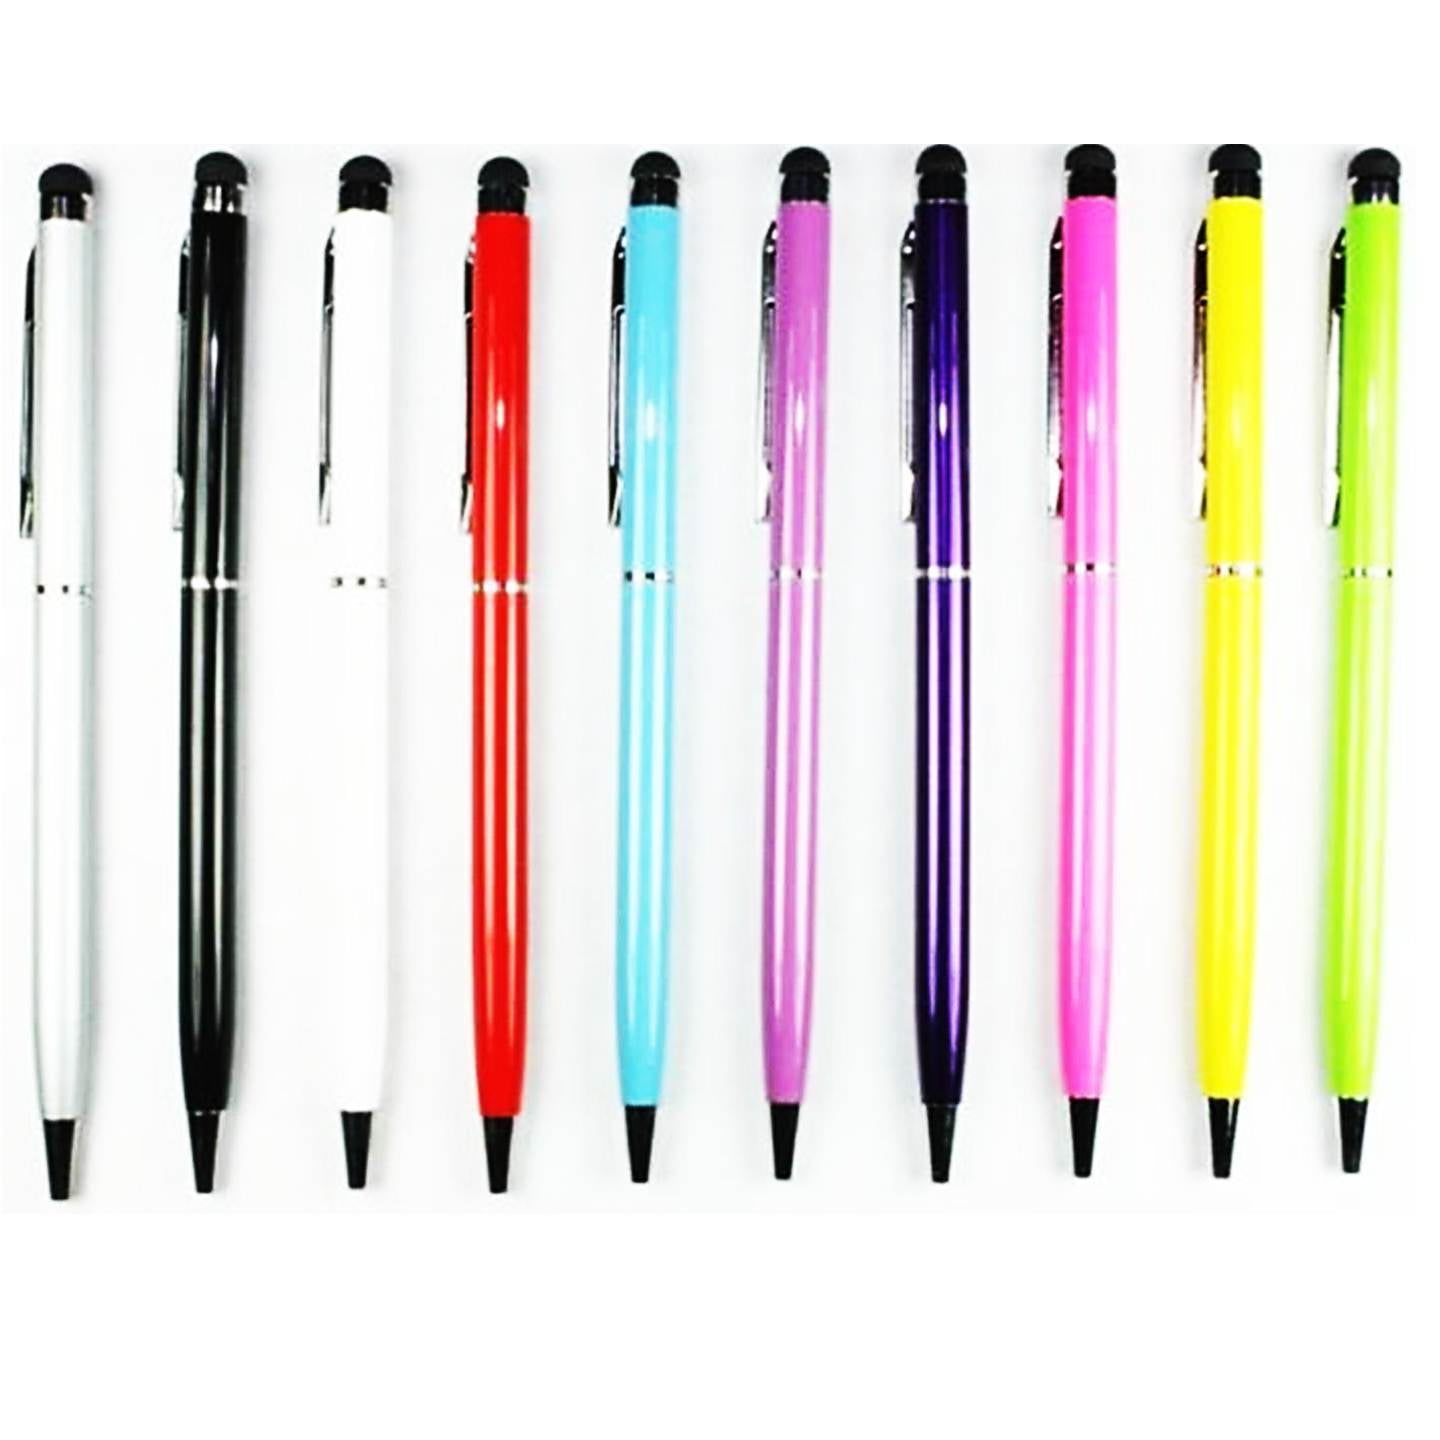 Mix 10X Universal Metal Stylus Touch Screen Pen For iPhone 5 Samsung Smart Phone 